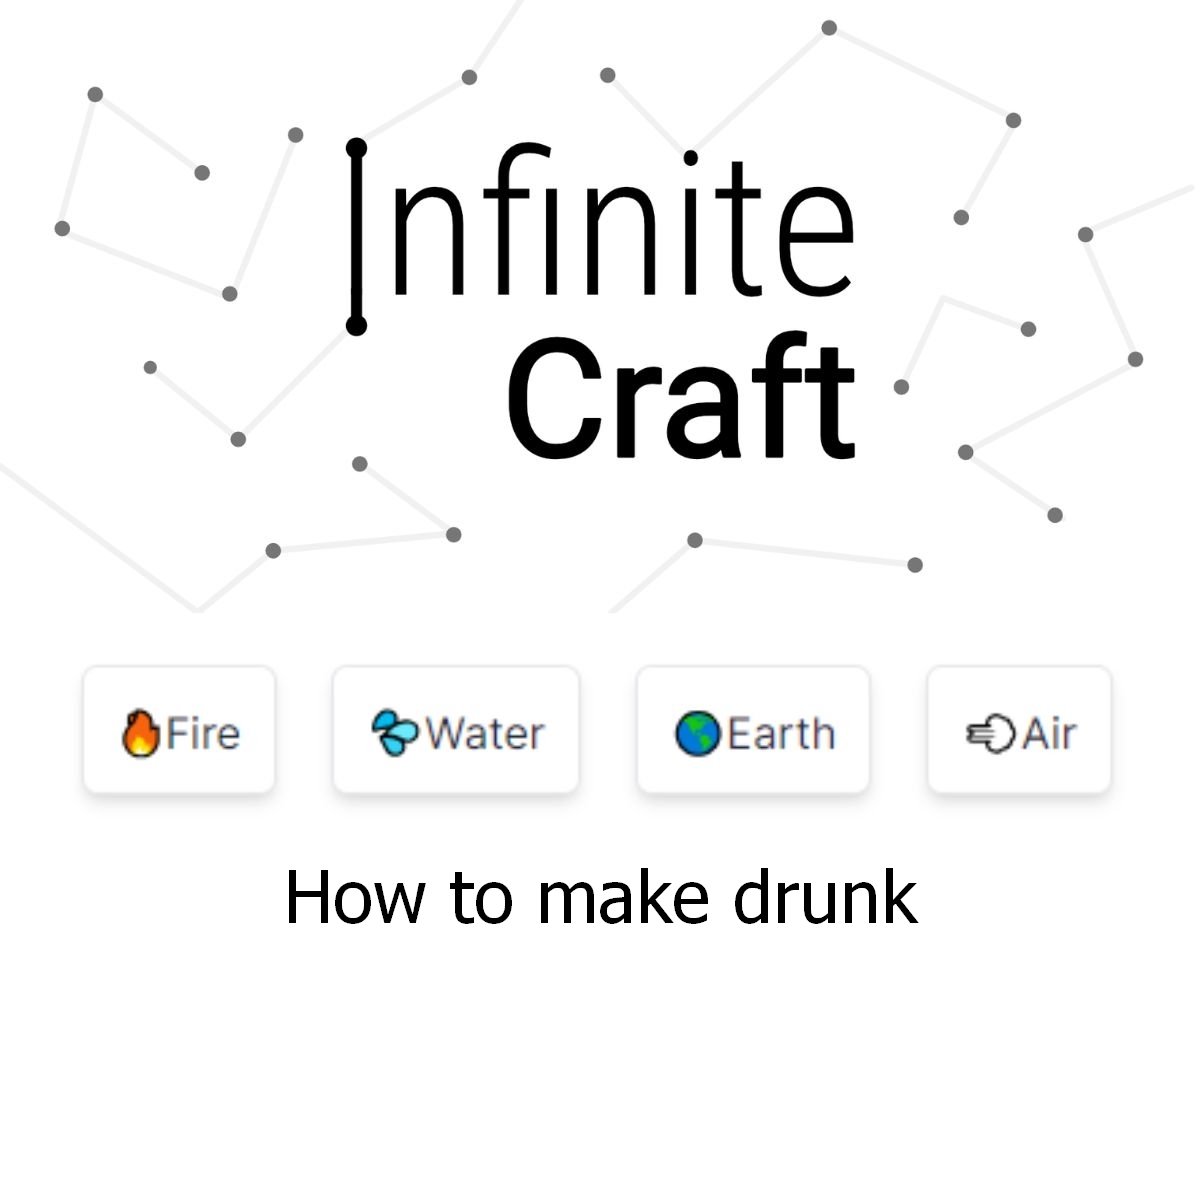 how to make drunk in infinite craft